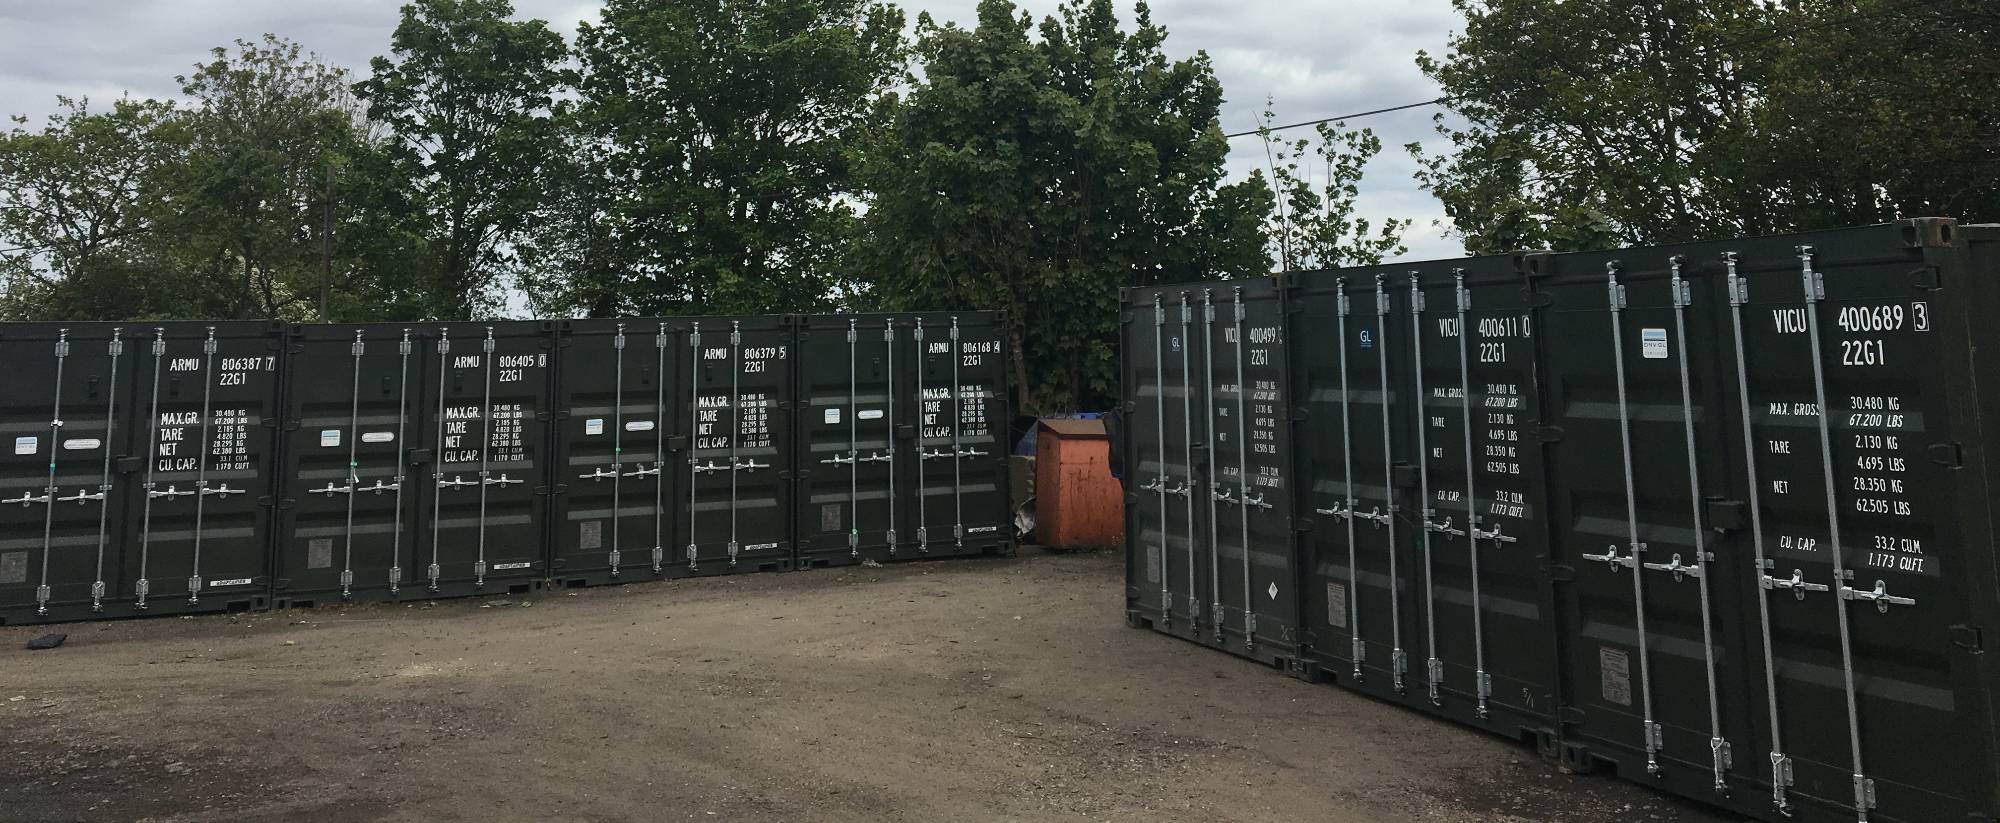 Container Storage in Chalfont St Giles